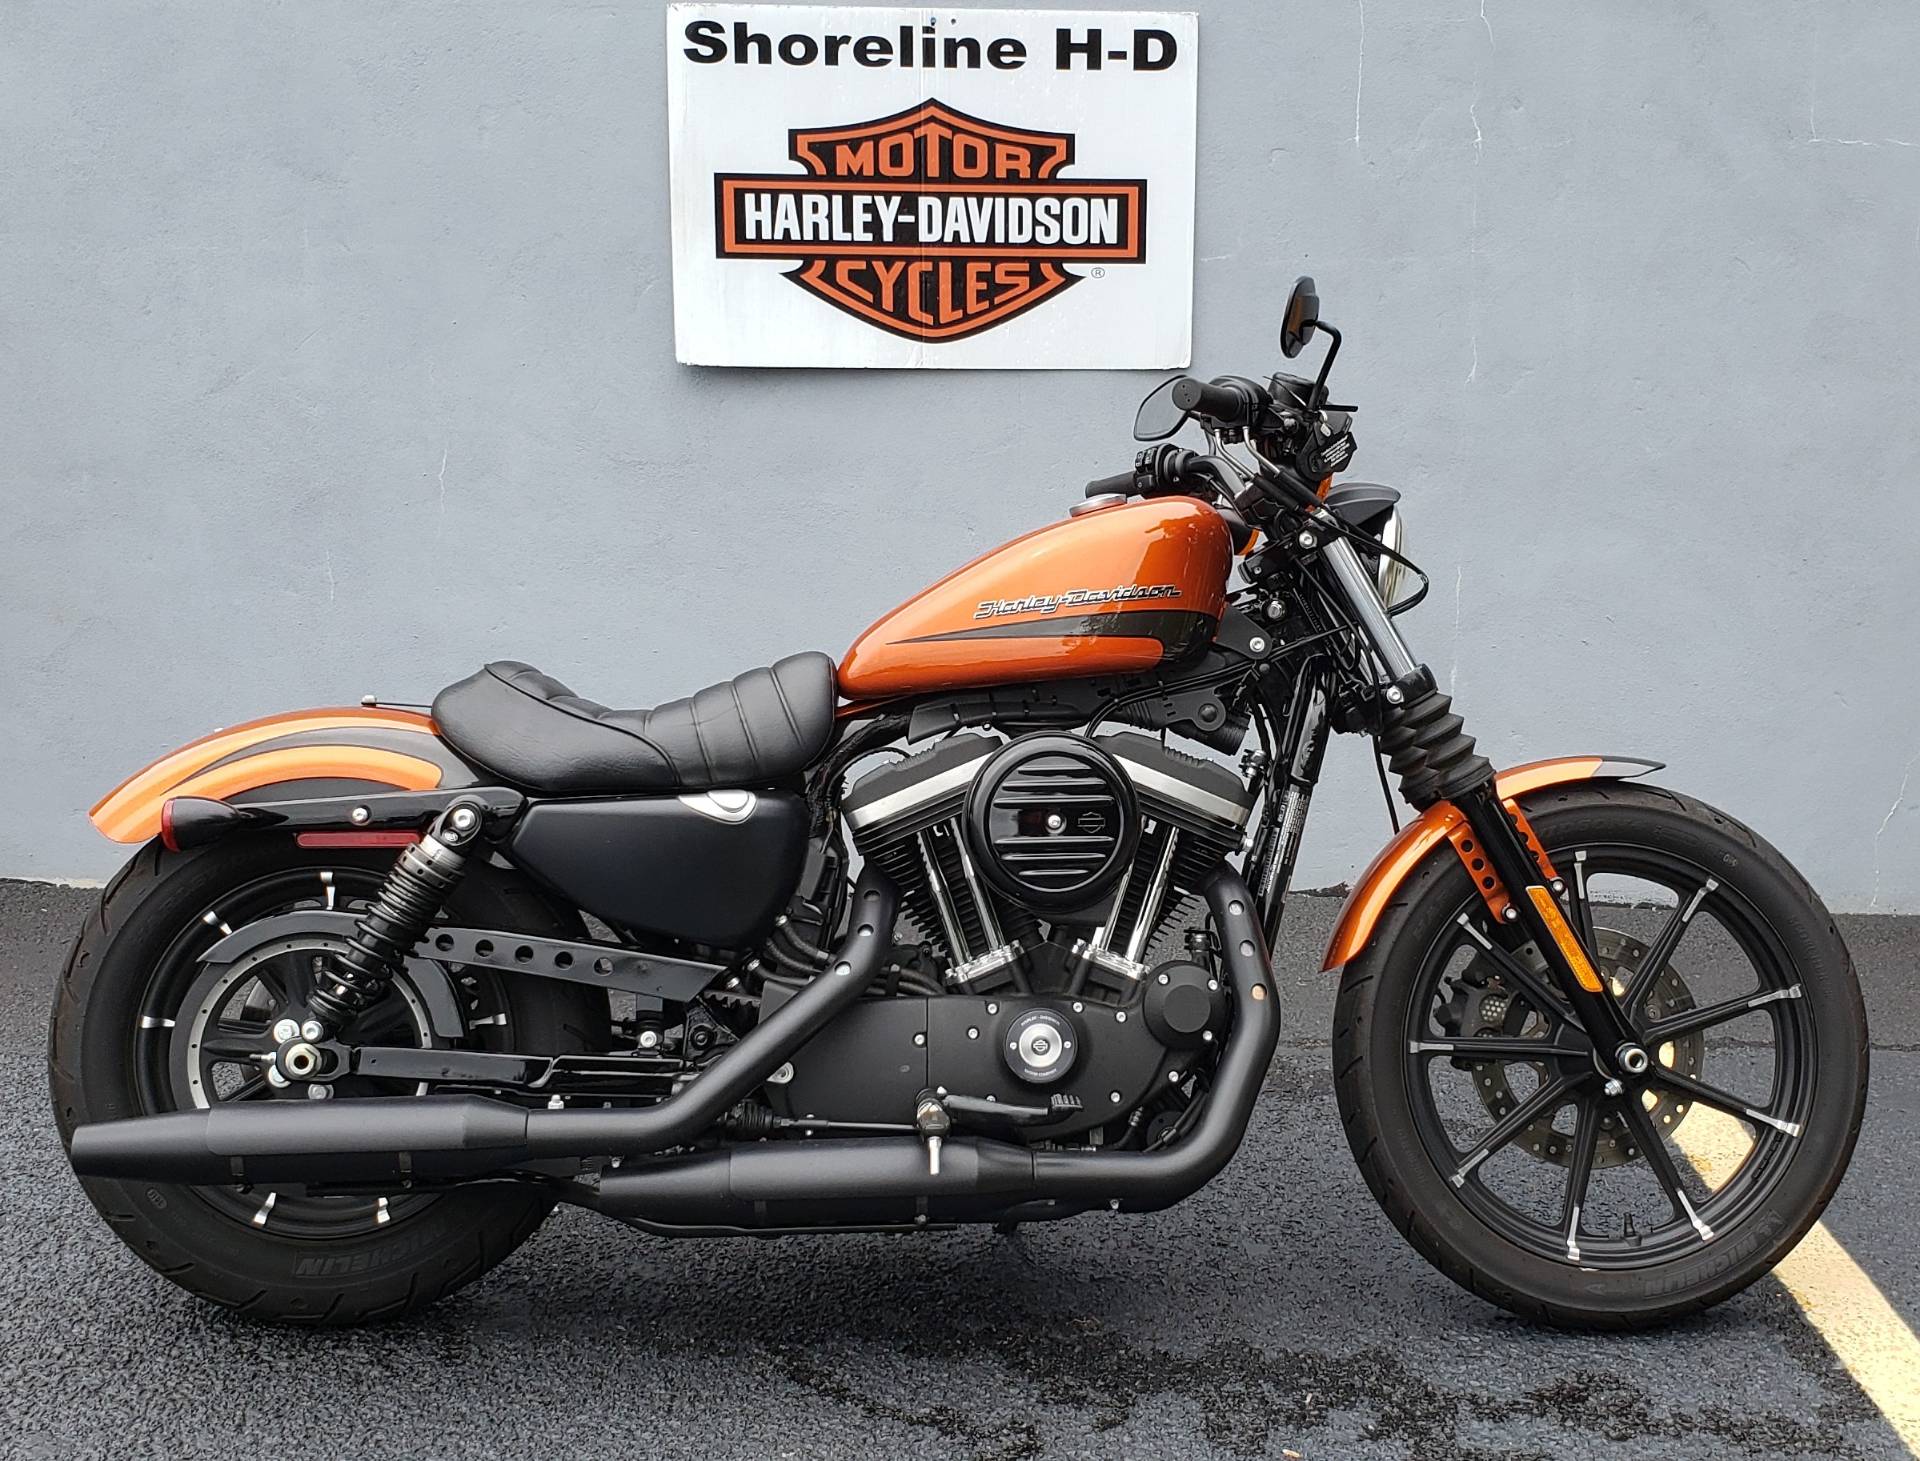 2021 Harley Davidson Iron 883 Buyer S Guide Specs Prices And Photos